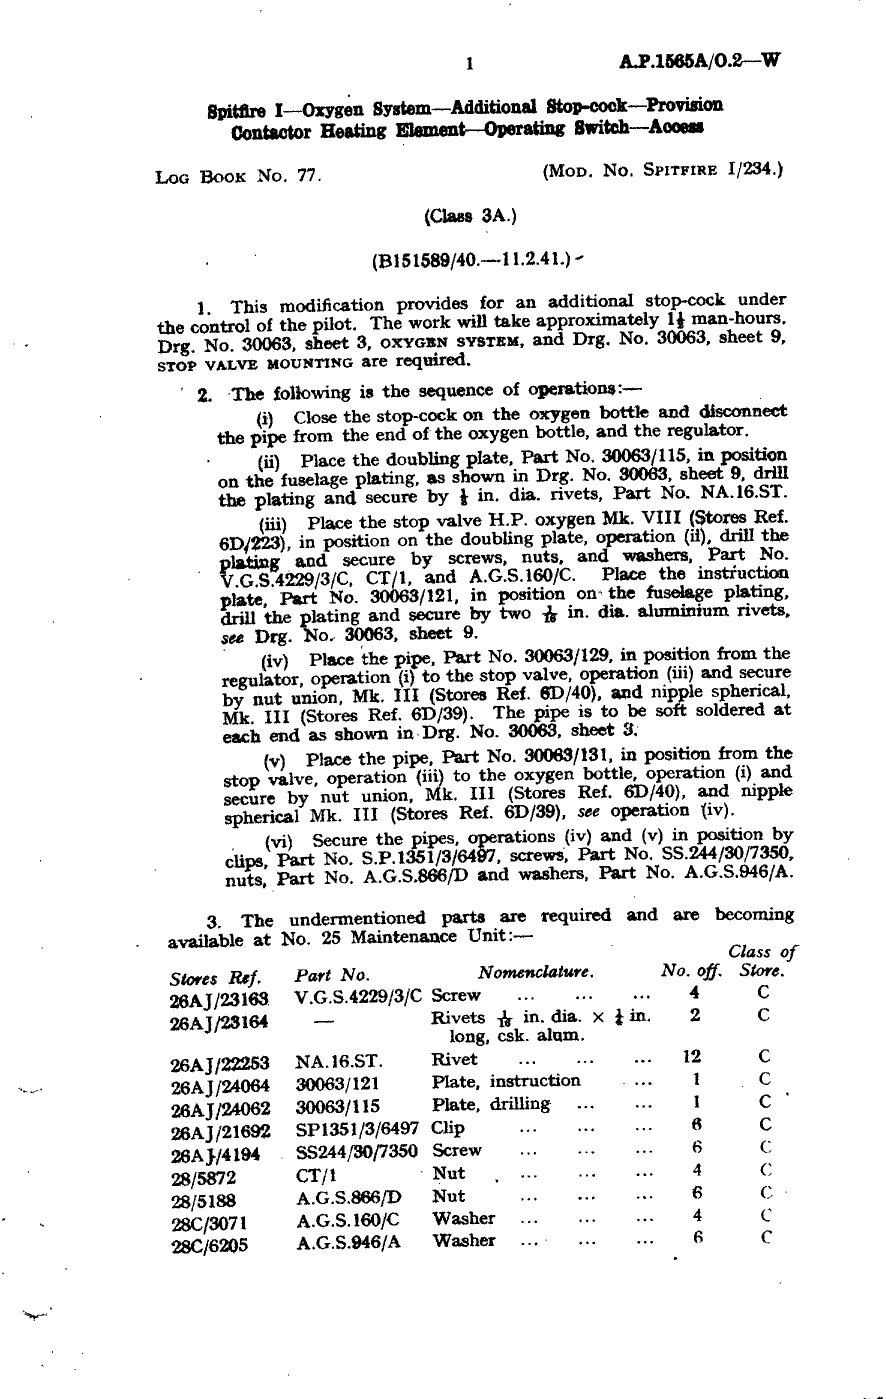 Sample page 1 from AirCorps Library document: Spitfire I Oxygen System Additional Stop Cock Provision Contractor Heating Element Operating Switch Access